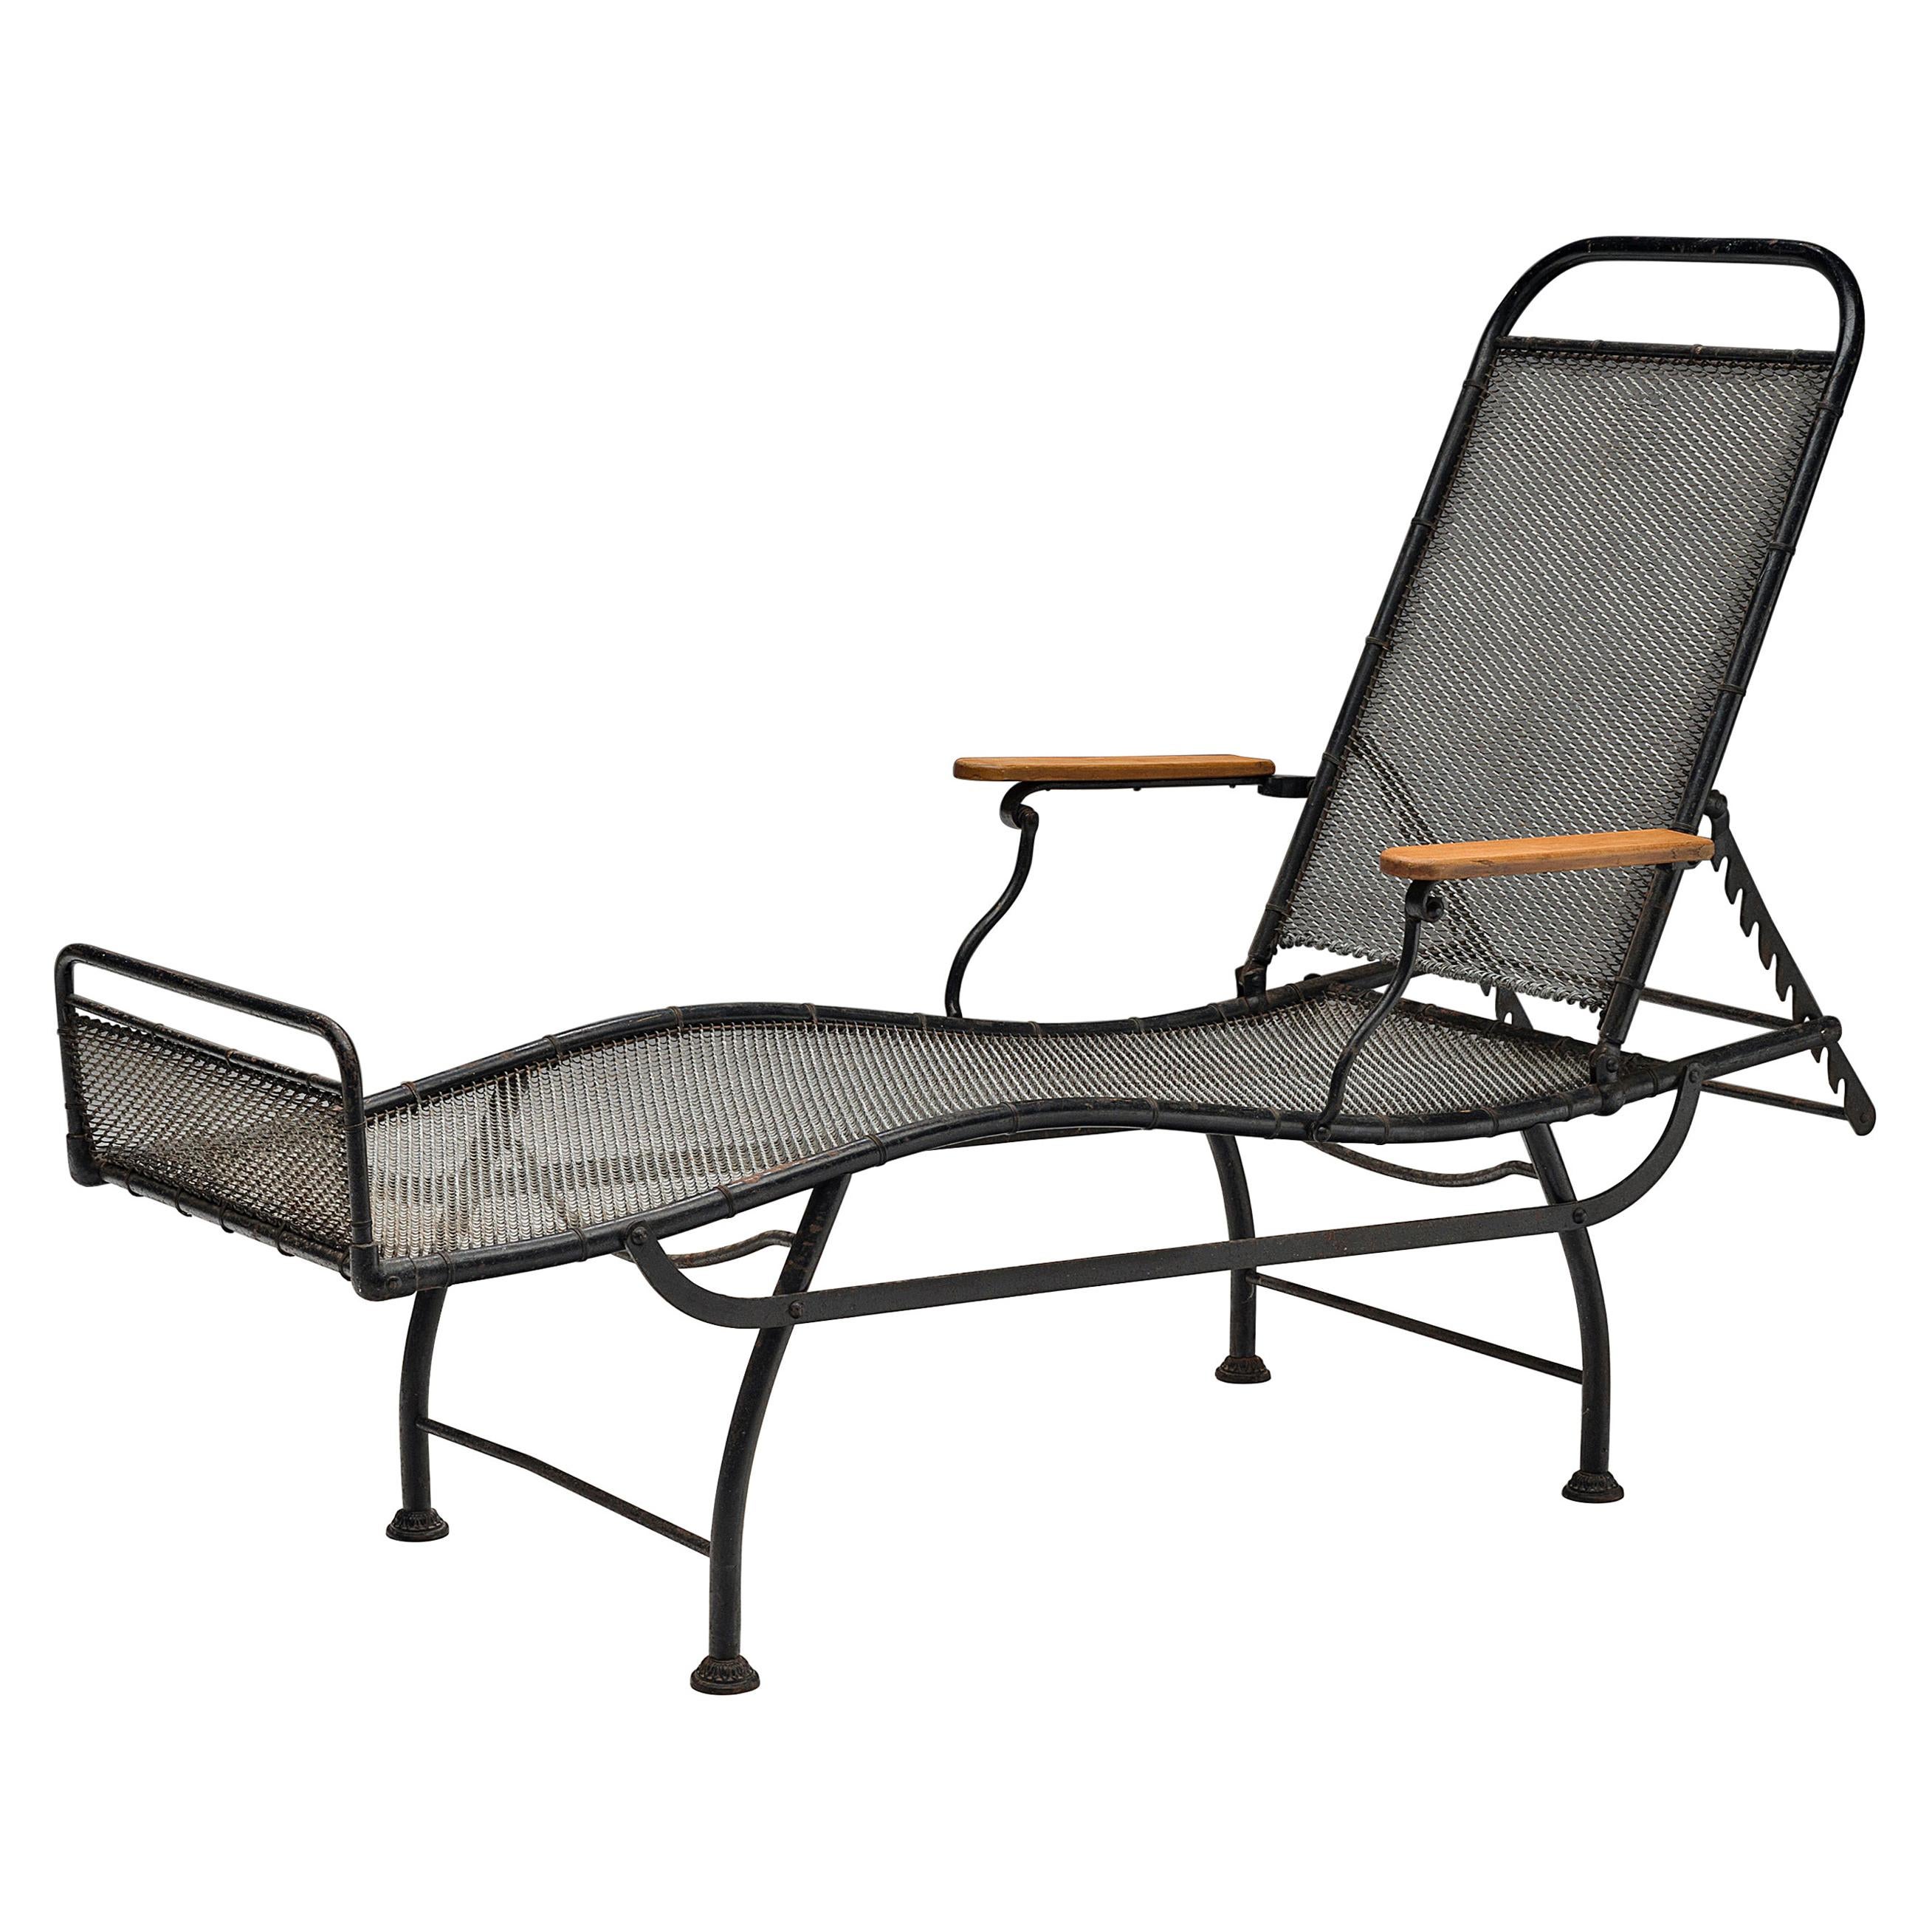 French Adjustable Chaise Longue in Black Metal and Wood